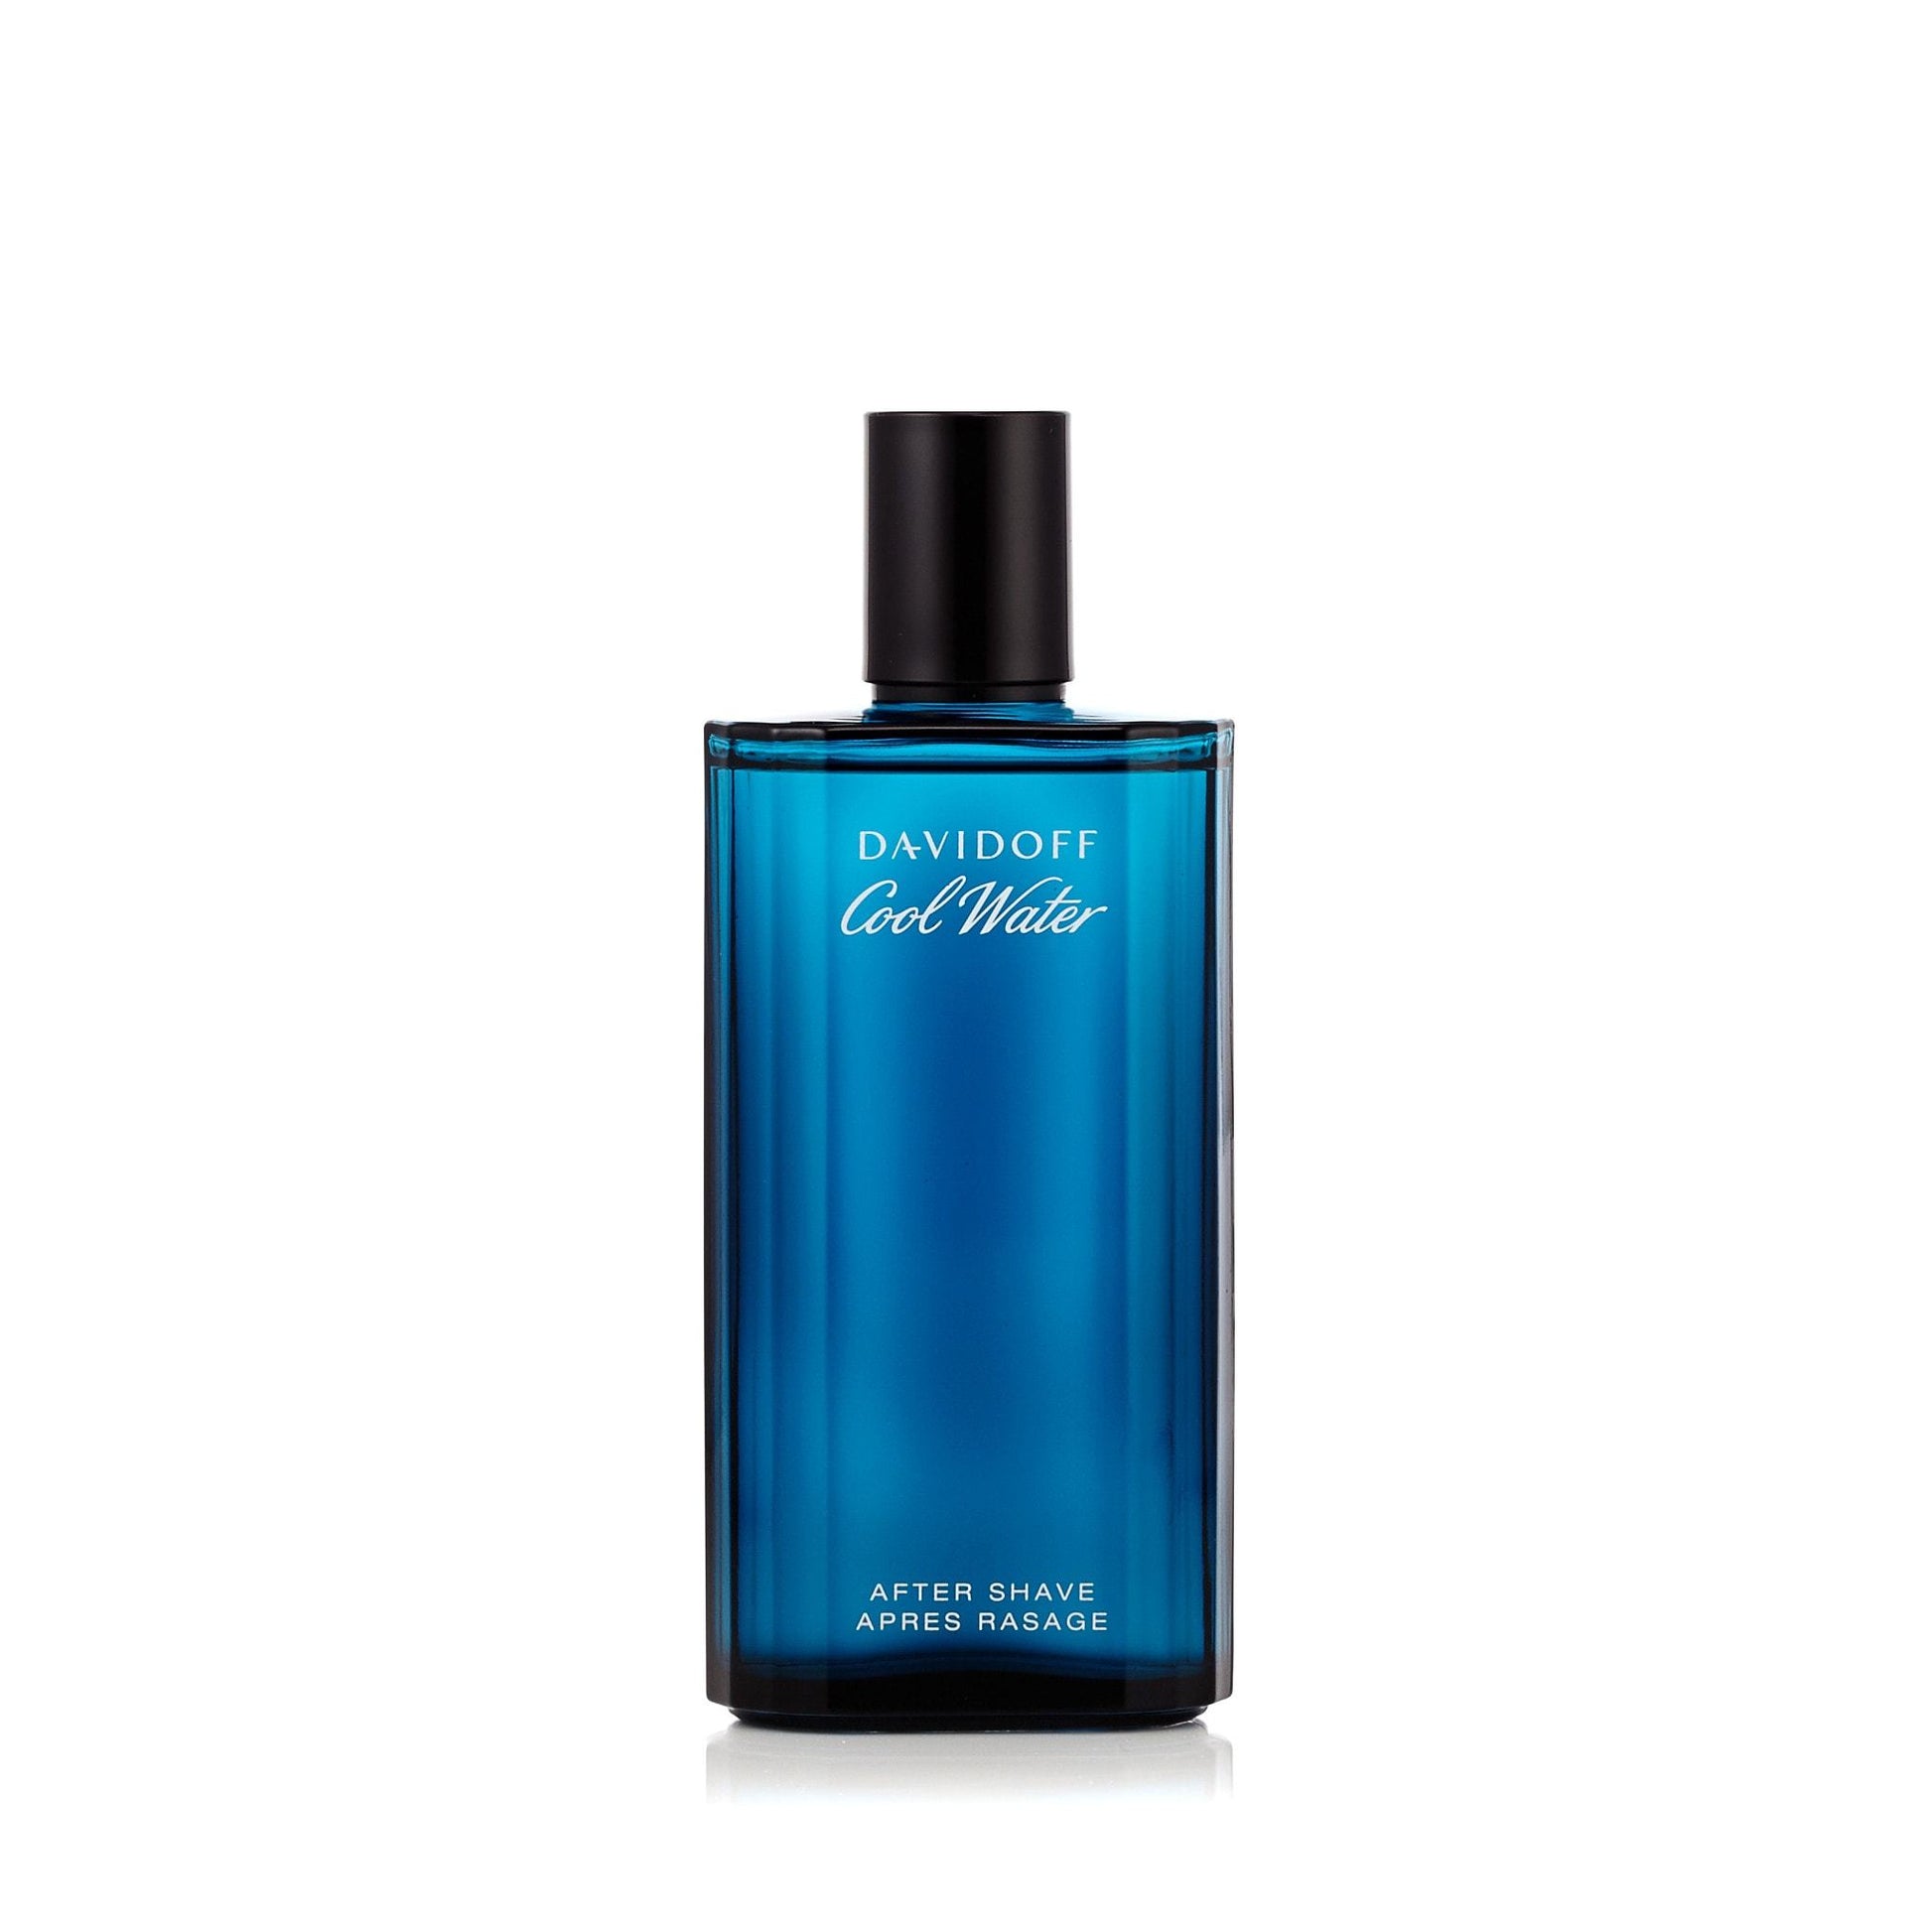 Cool Water After Shave for Men by Davidoff, Product image 2